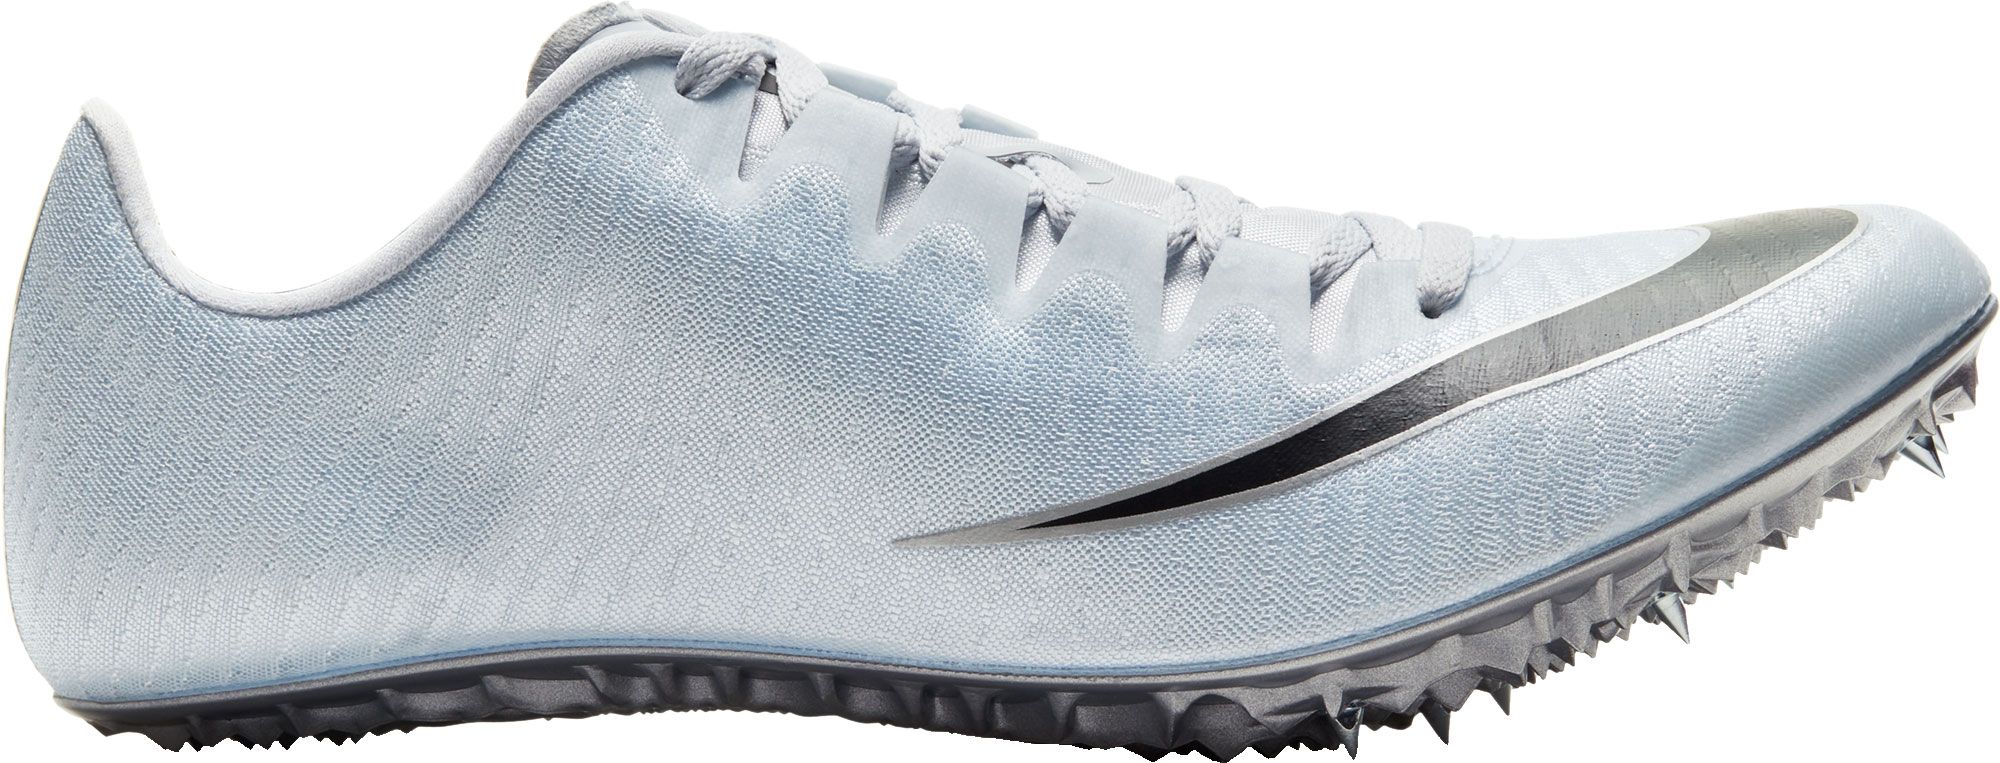 nike zoom superfly track spikes